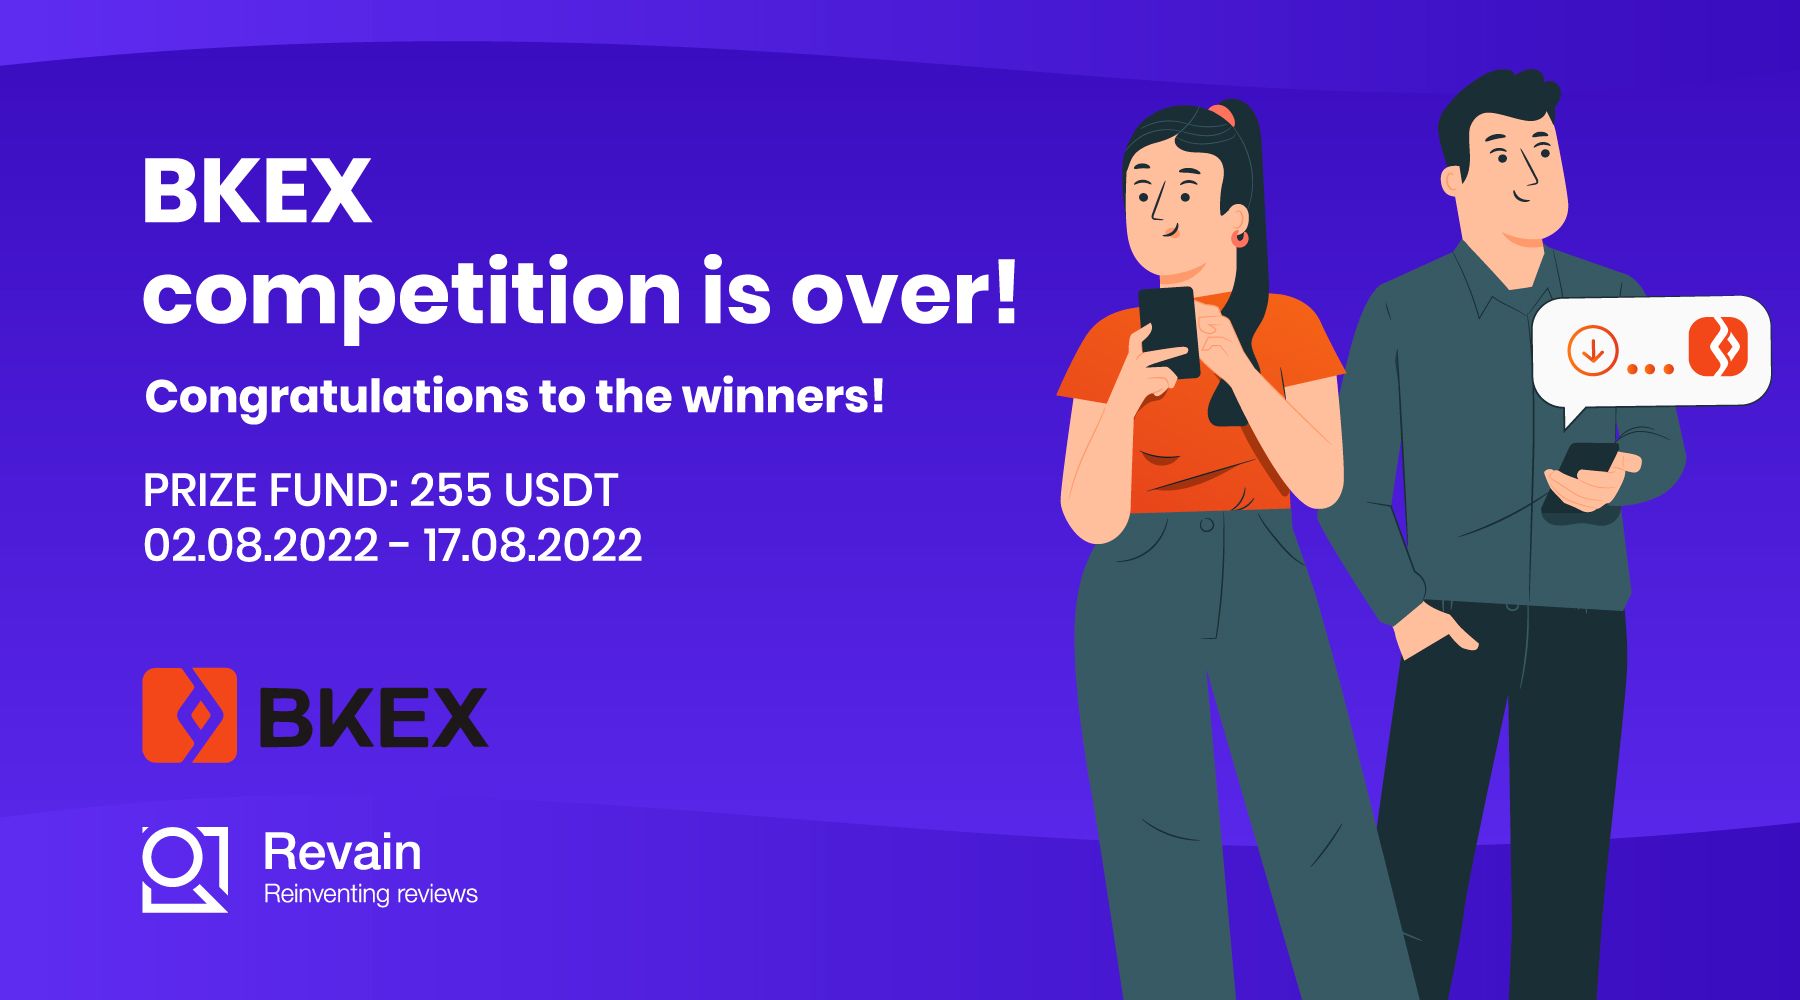 Article BKEX competition is over!